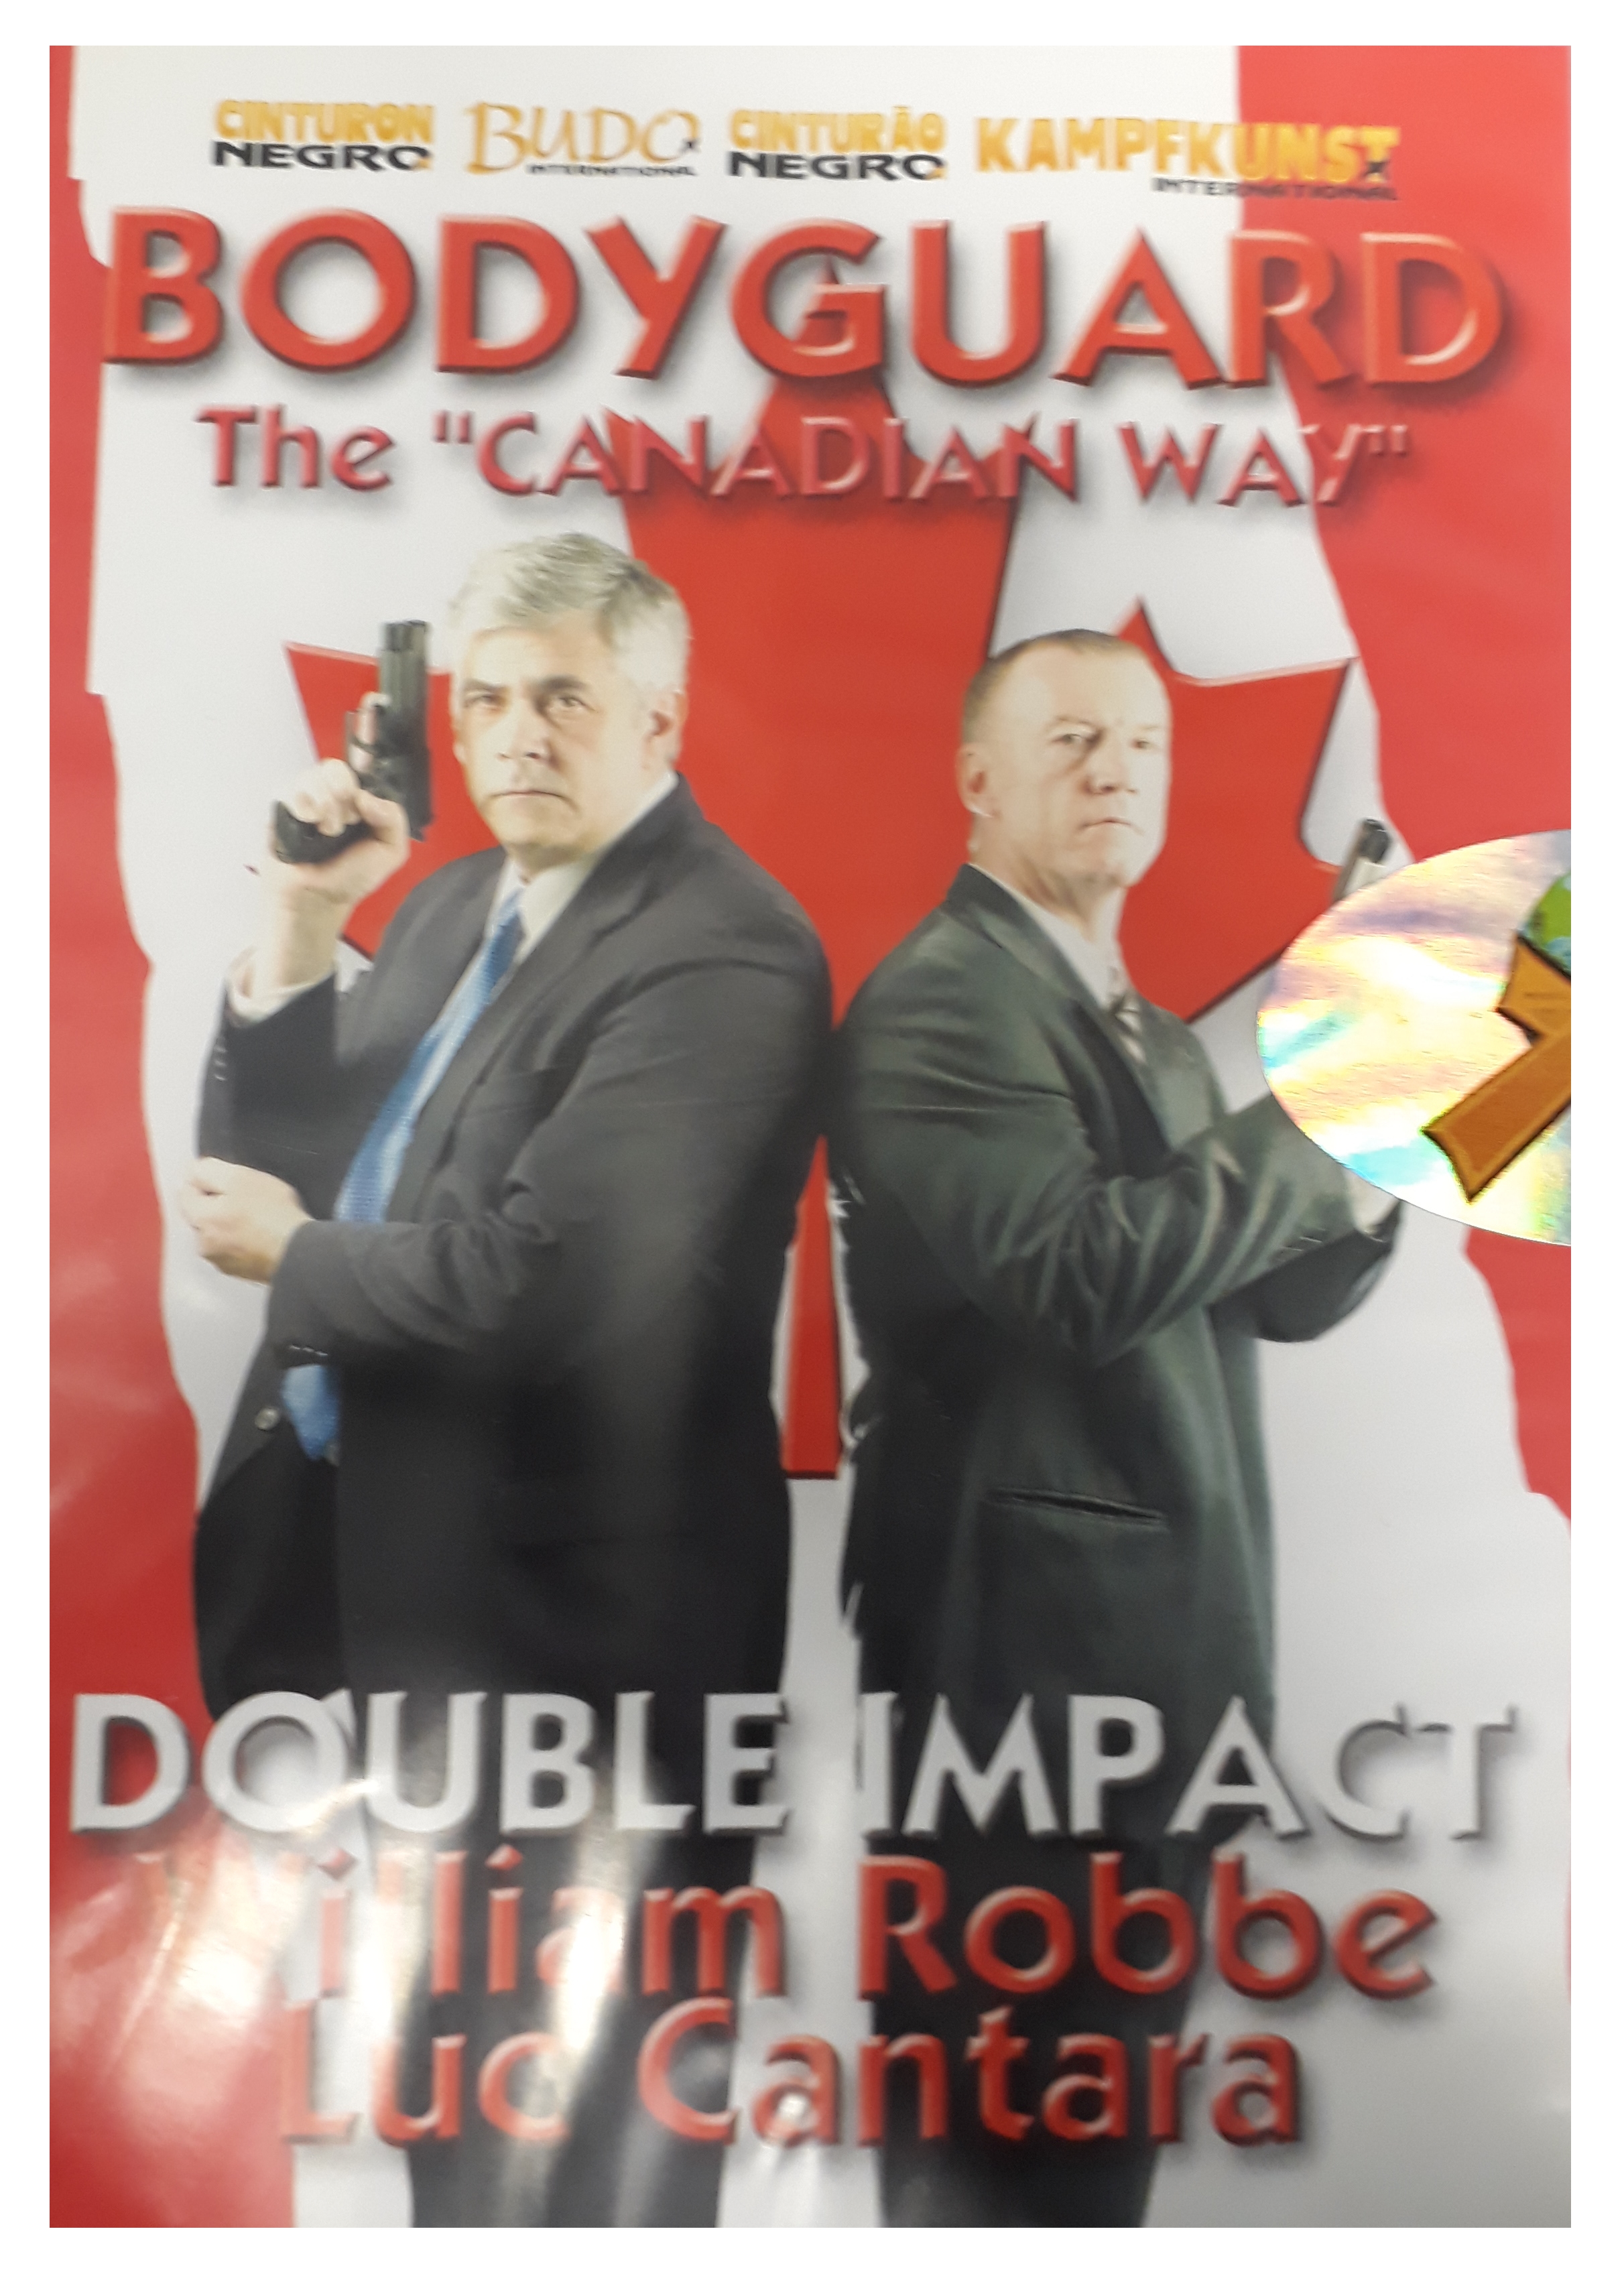 DVD Bodyguard "The Canadian Way", Double Impact